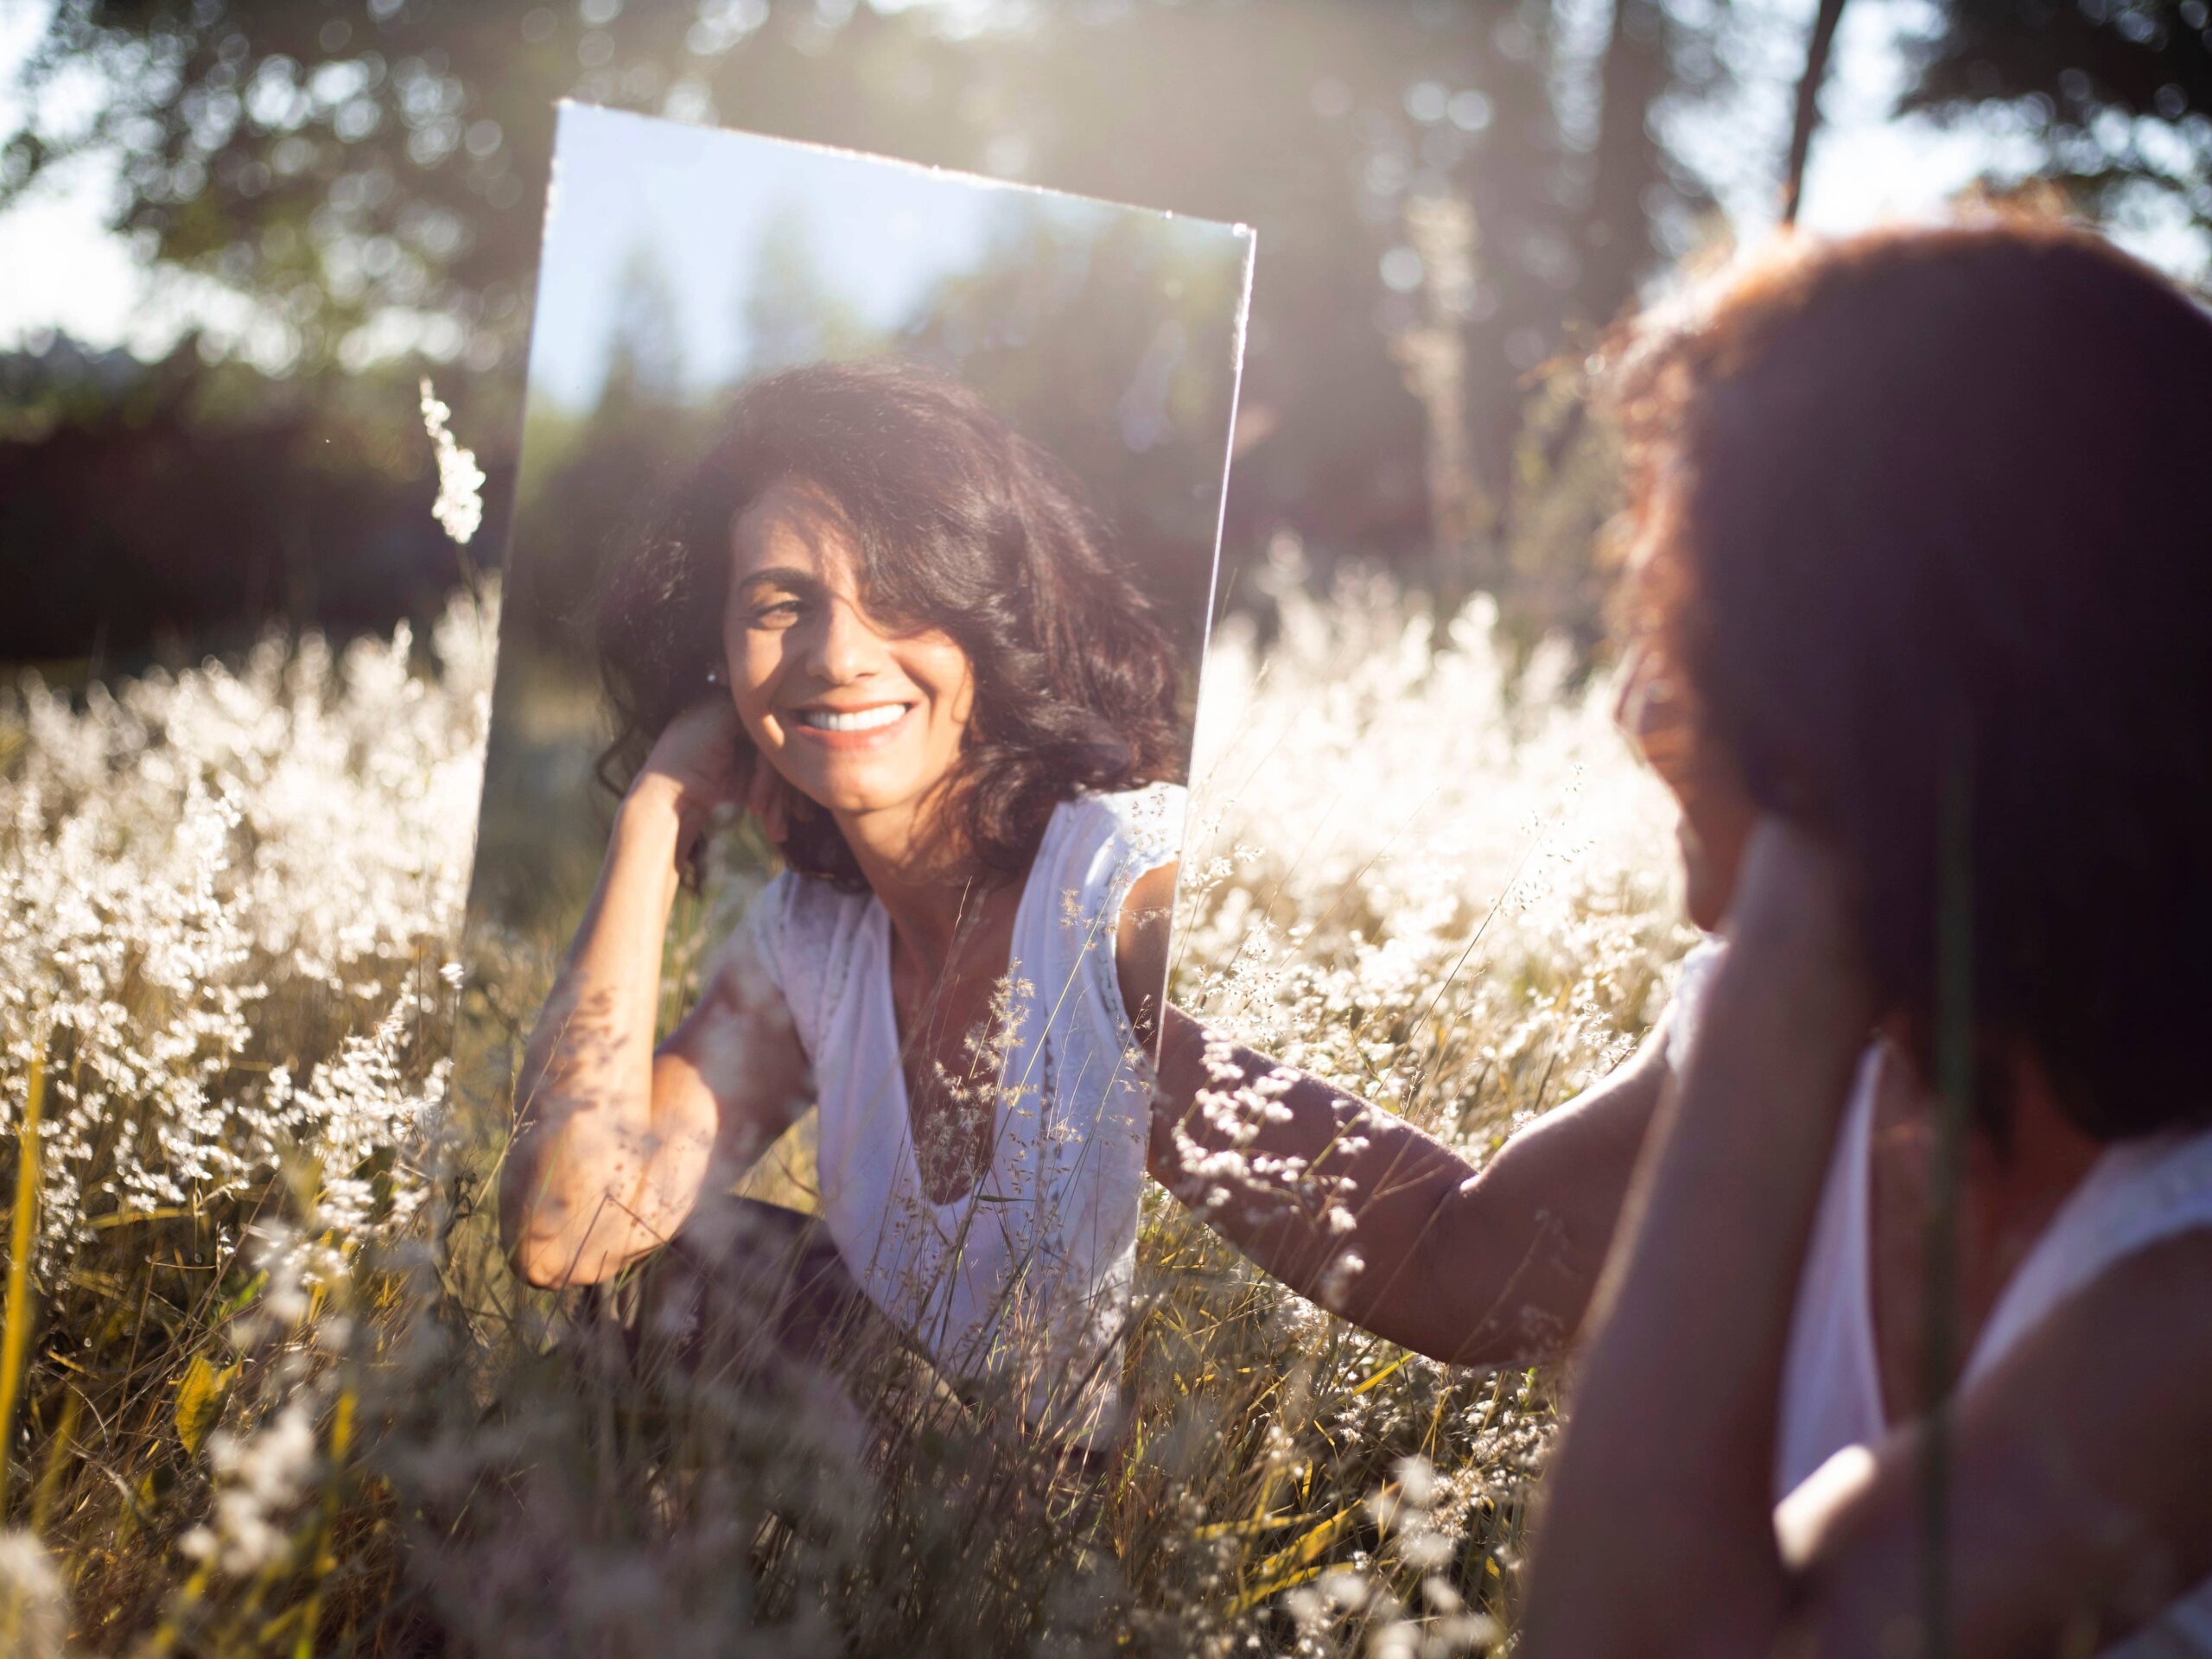 12 Things to Tell Yourself When You’re Being Too Hard on Yourself